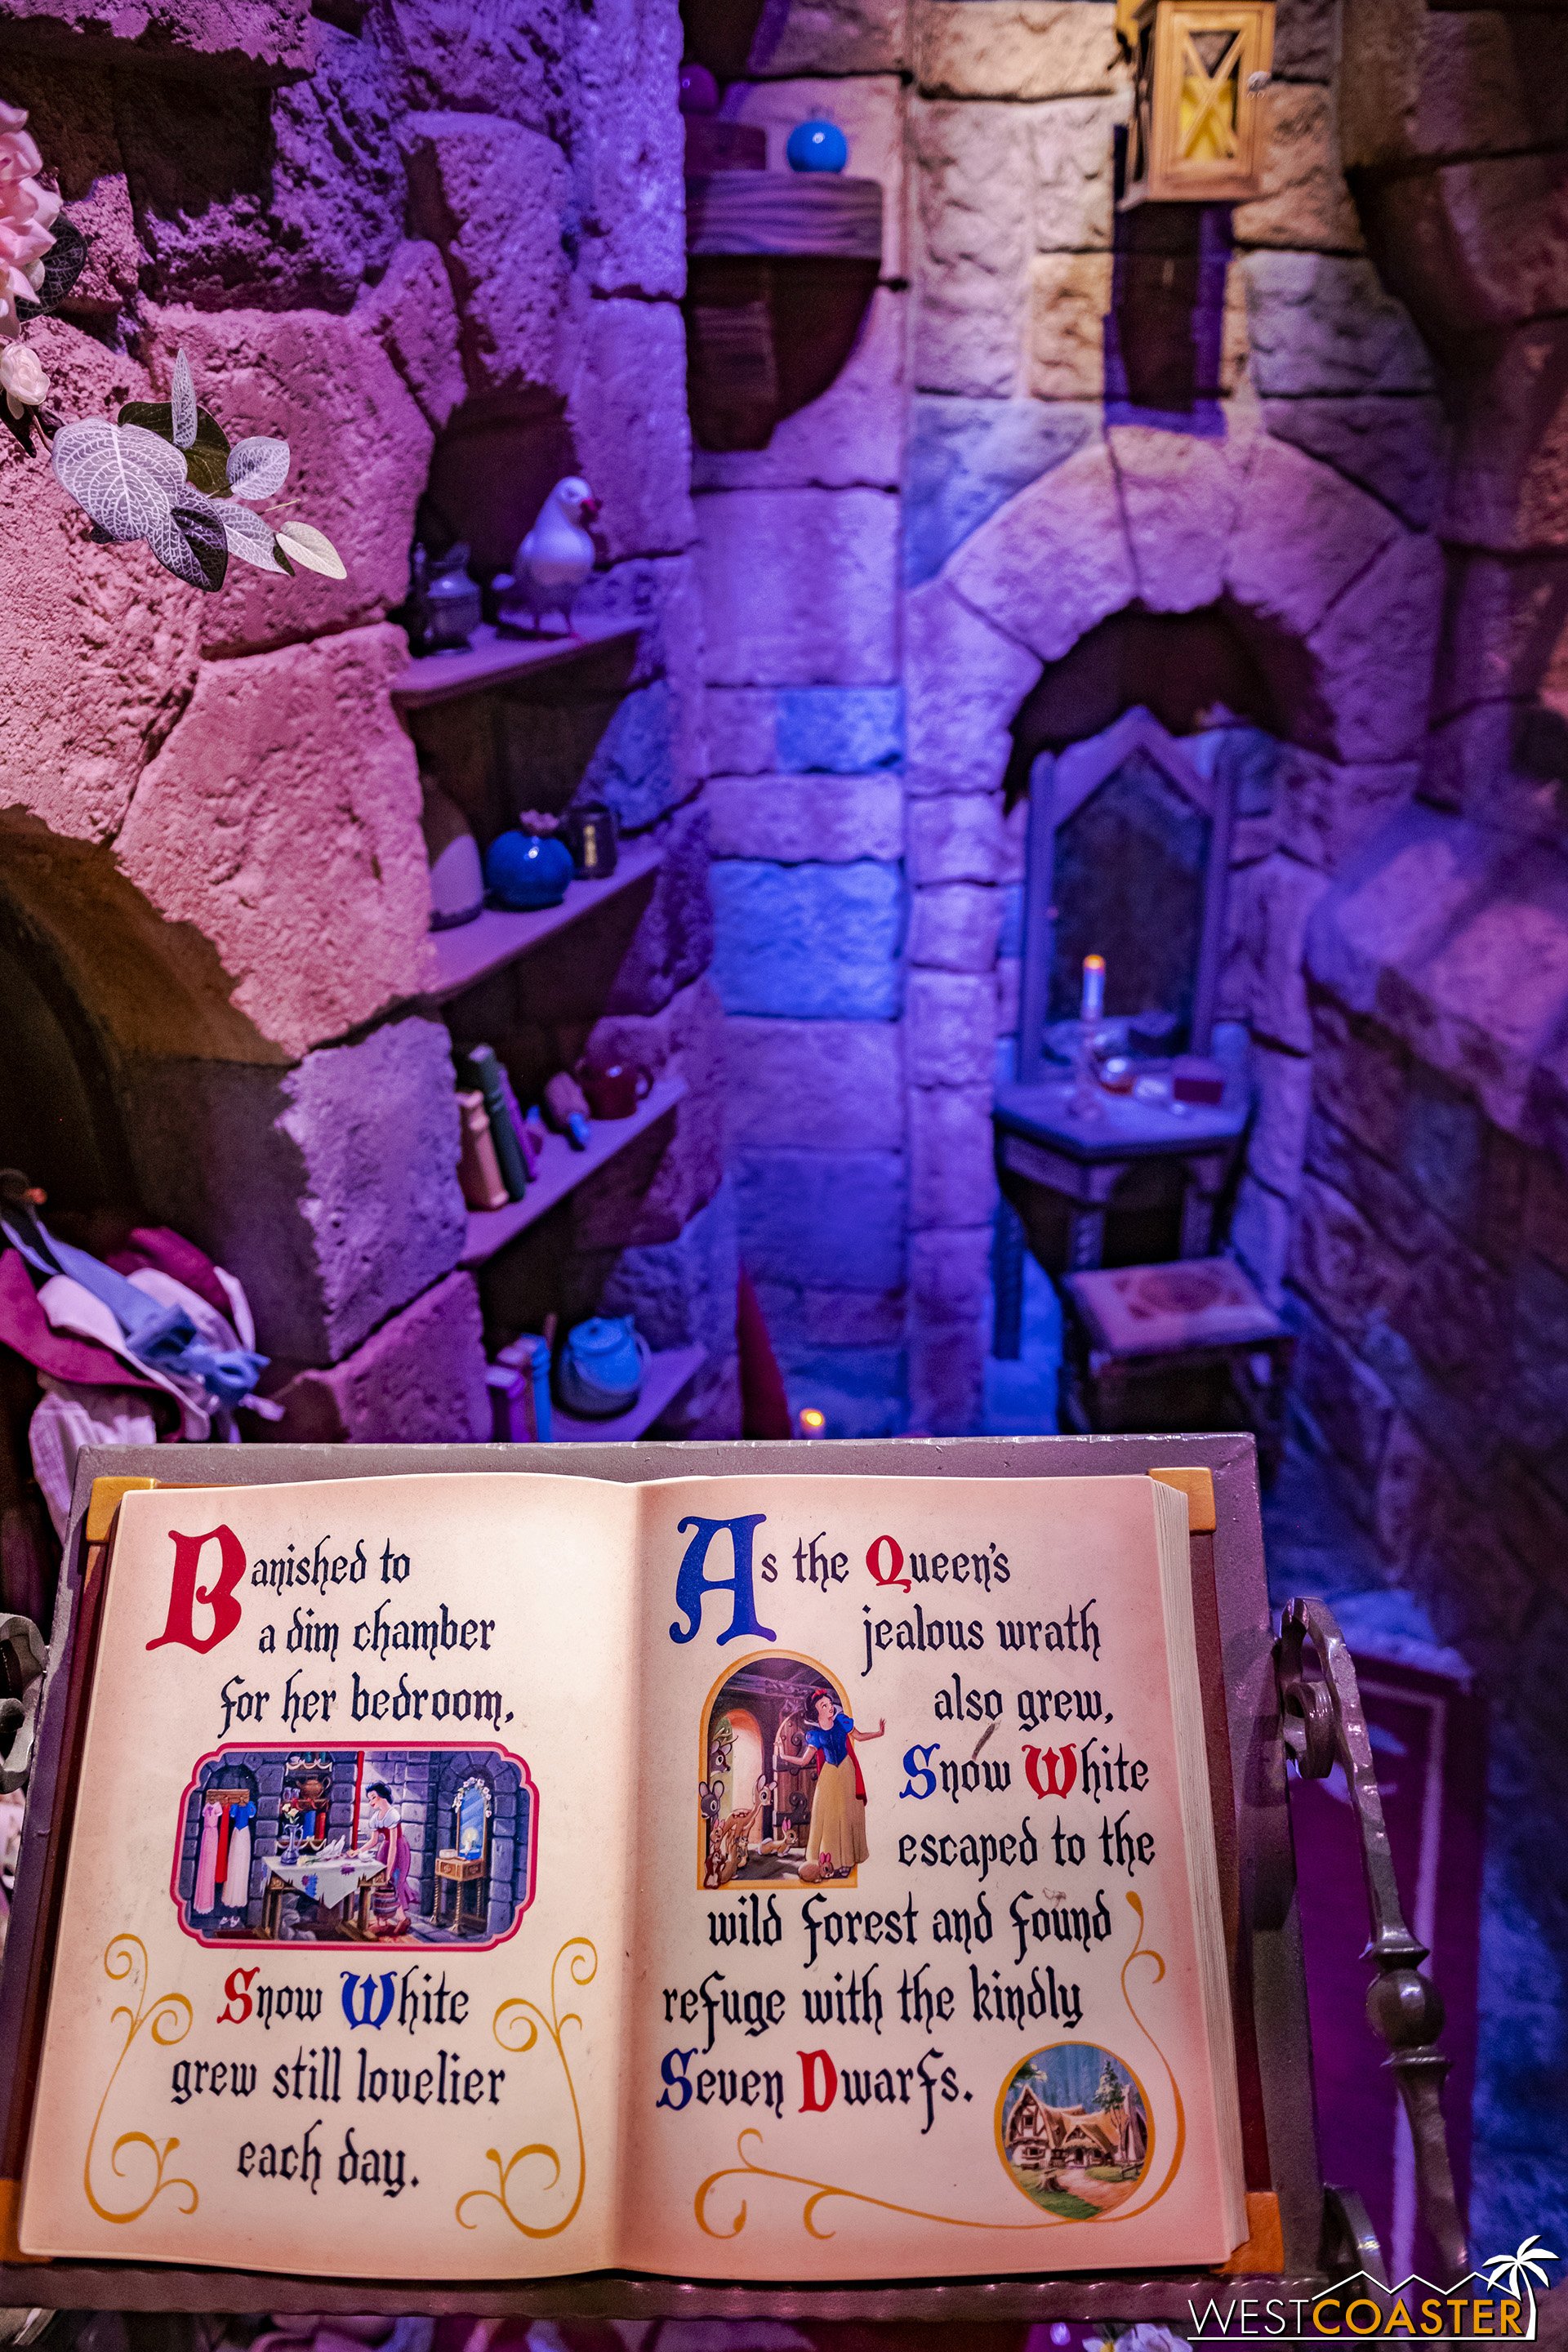  Inside, the queue scenes take on a much less ominous tone.  The chamber where Snow White was locked up is the same, but it’s been lit and presented differently. 